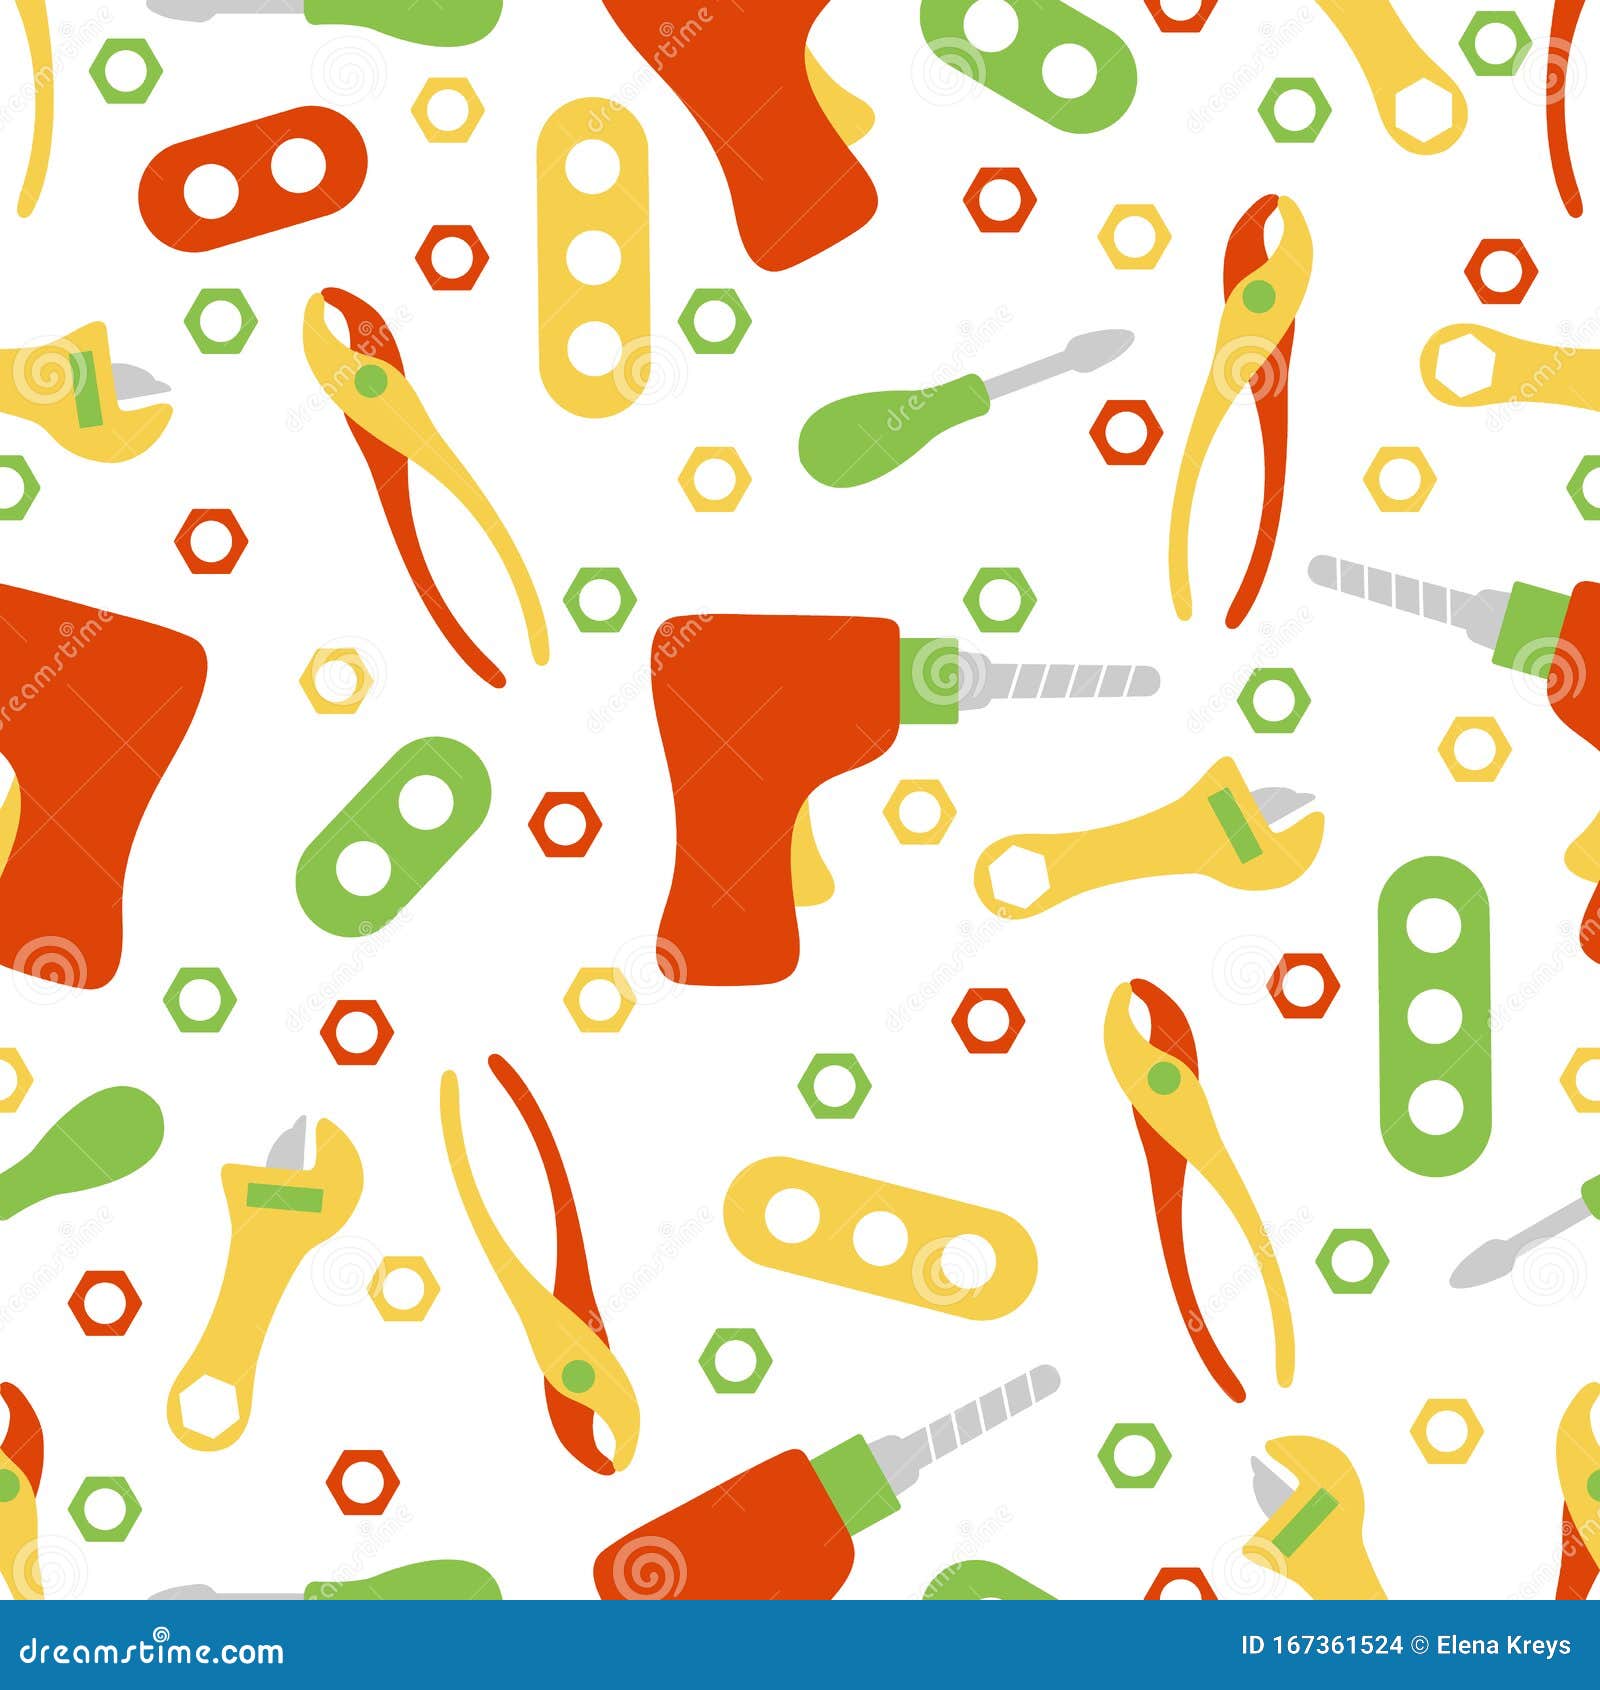 Seamless pattern background of adjustable wrench Vector Image